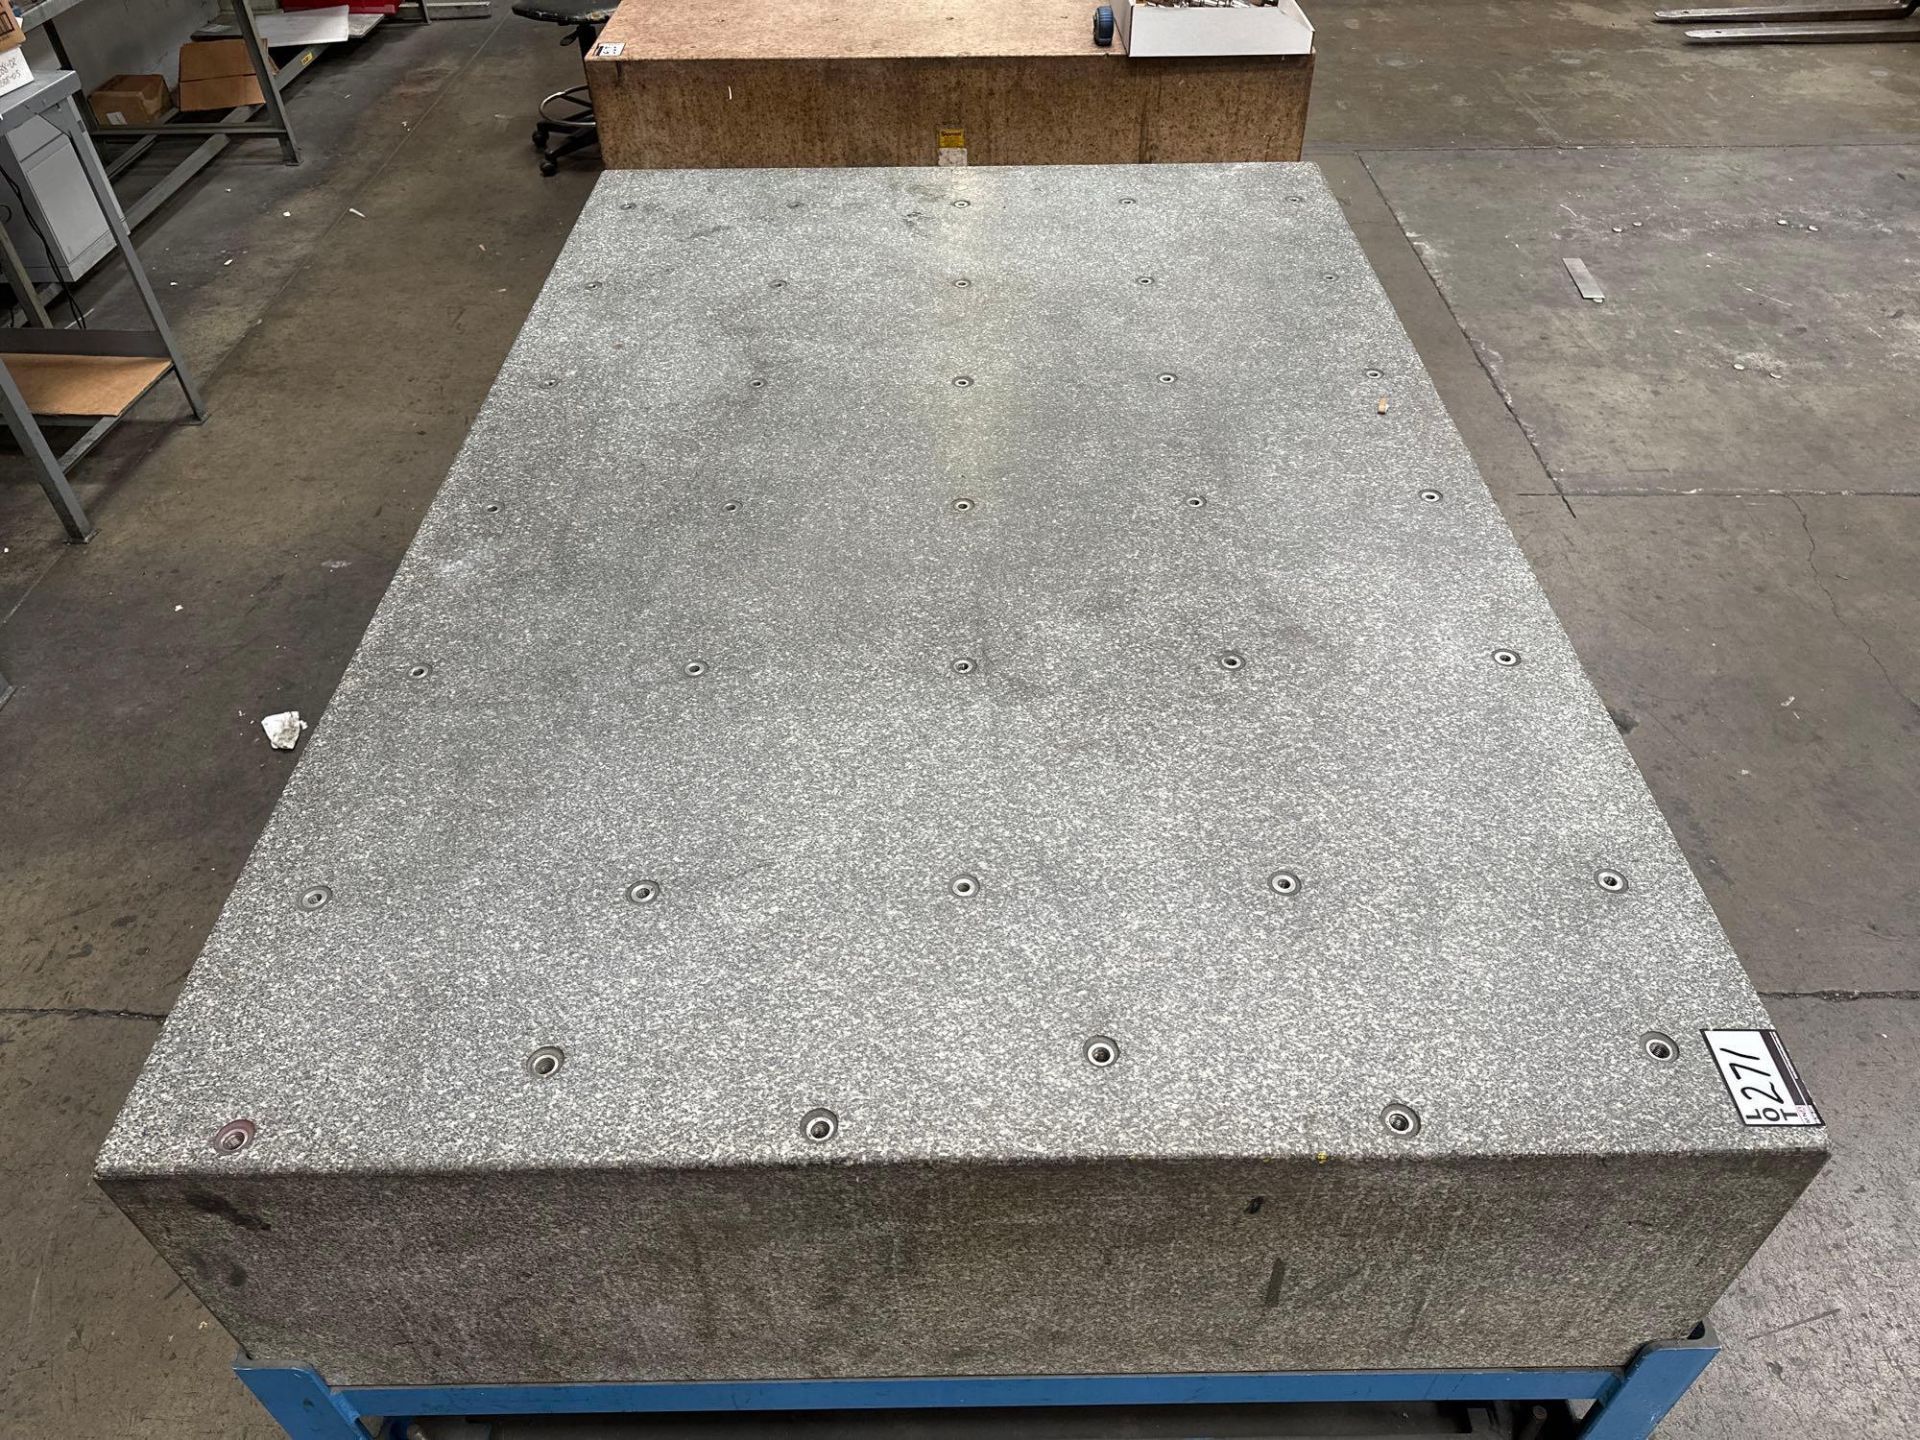 18” x 59” x 90” Granite Surface Plate w/ Steel Stand - Image 5 of 6